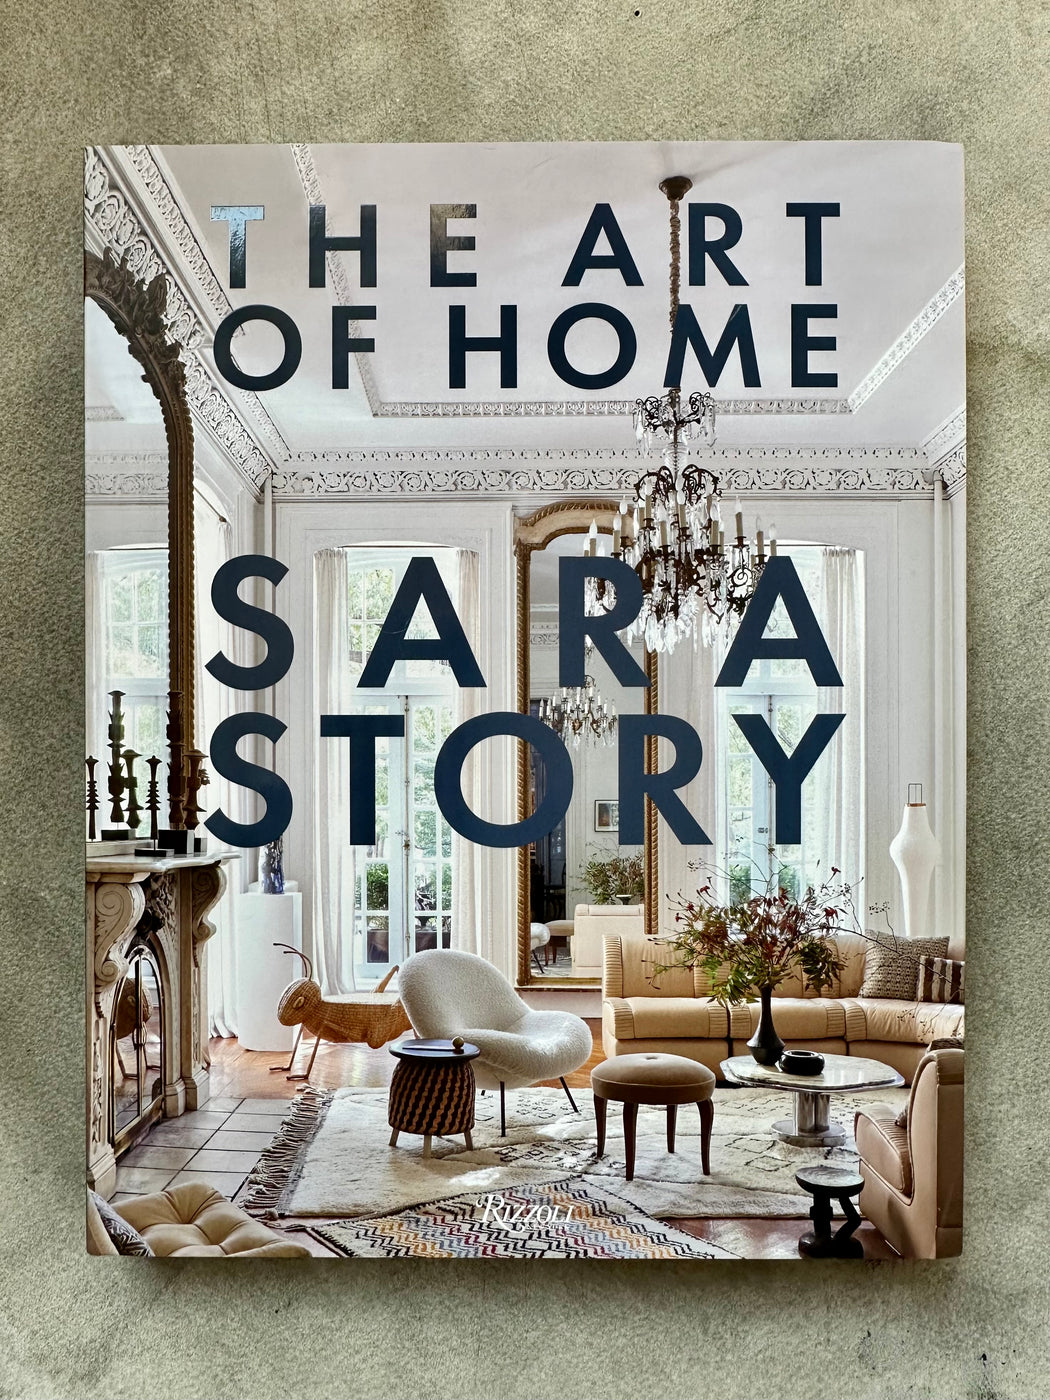 "The Art of Home" by Sarah Story